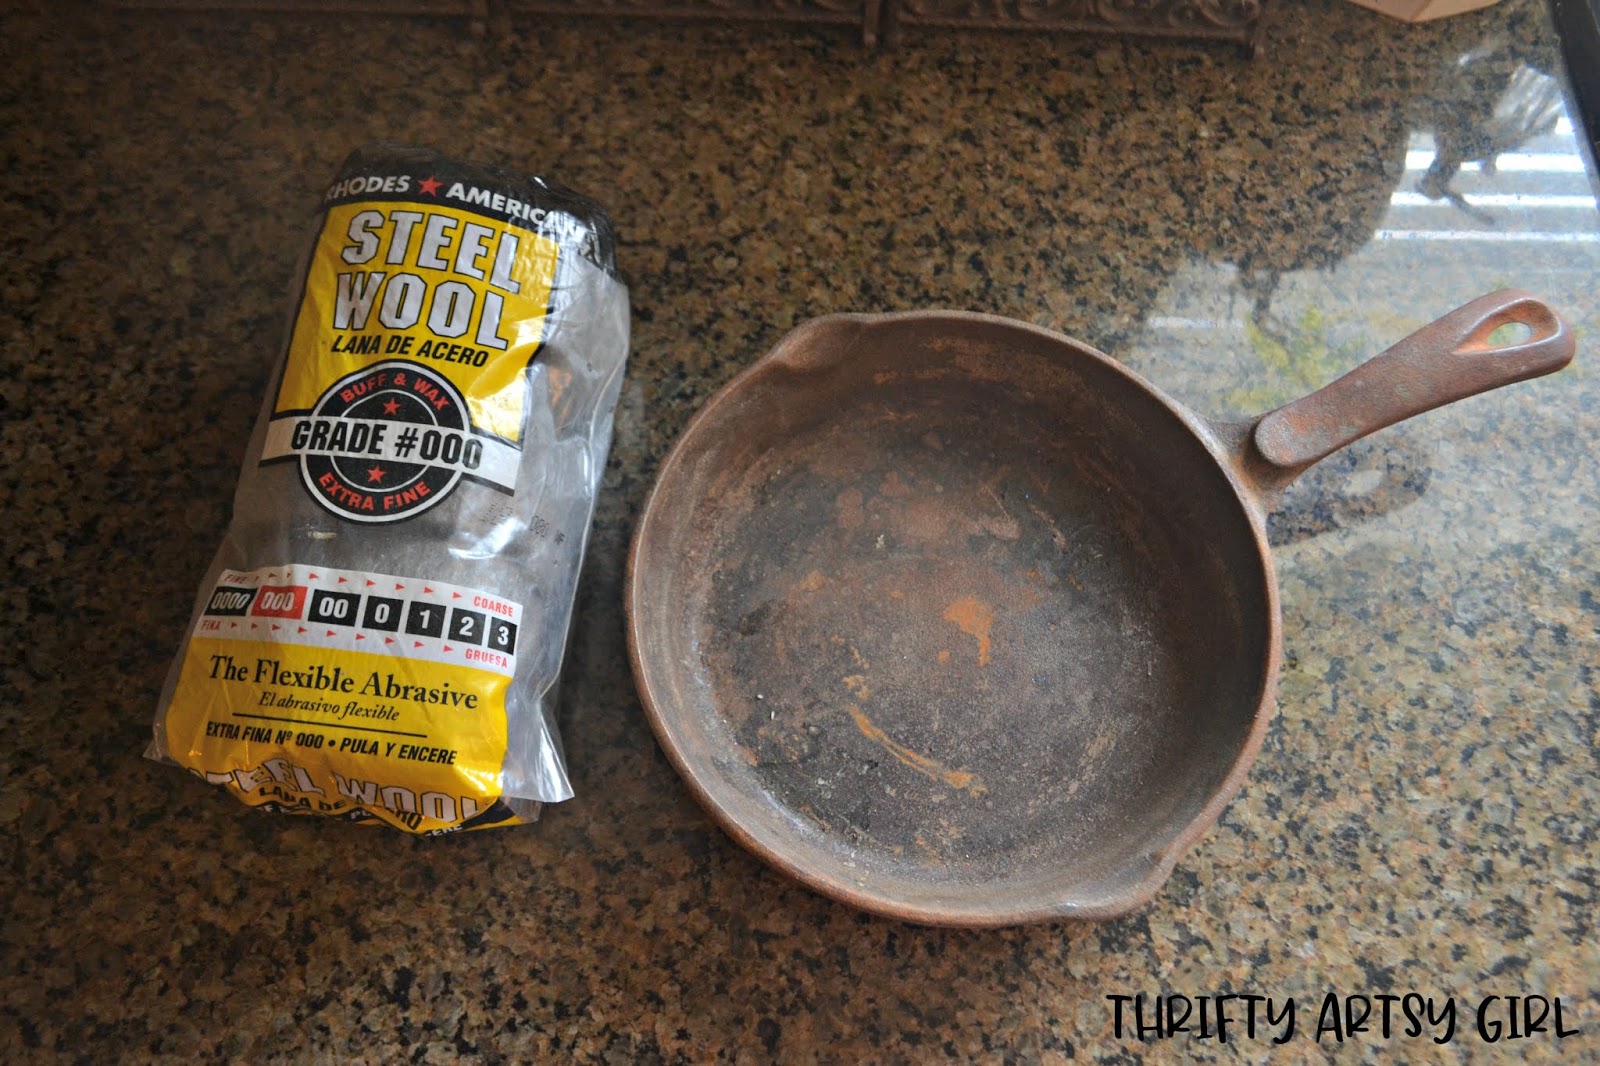 How to Clean a Cast Iron Skillet to Keep It From Rusting